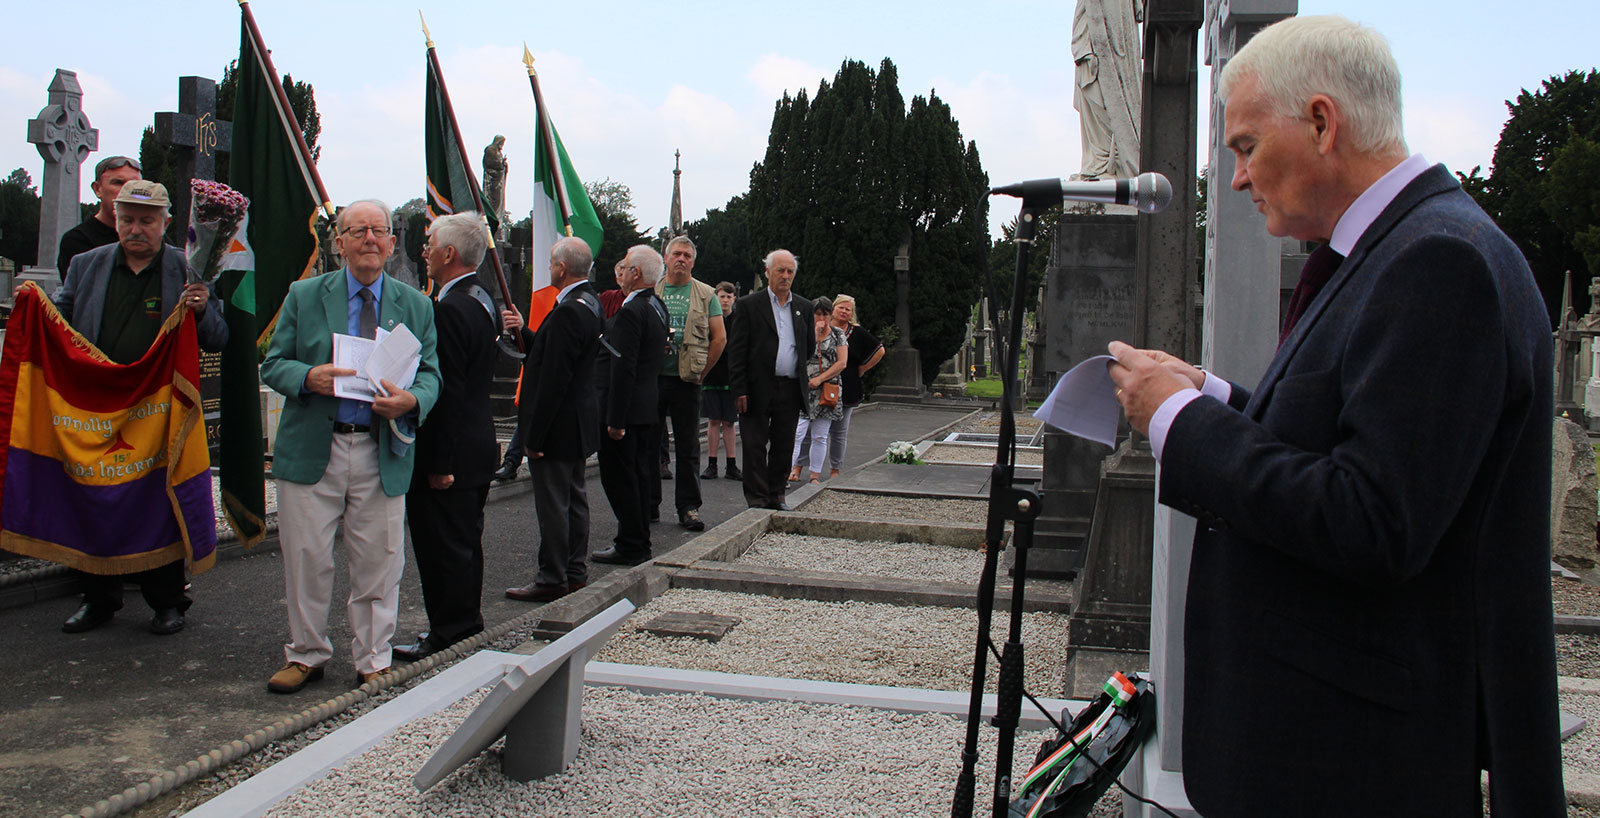 Tommy McKearney delivers an oration at the unveiling of a memorial for Fr. Michael O'Flanagan, Republican Plot, Glasnevin Cemerery, 25th August 2019.